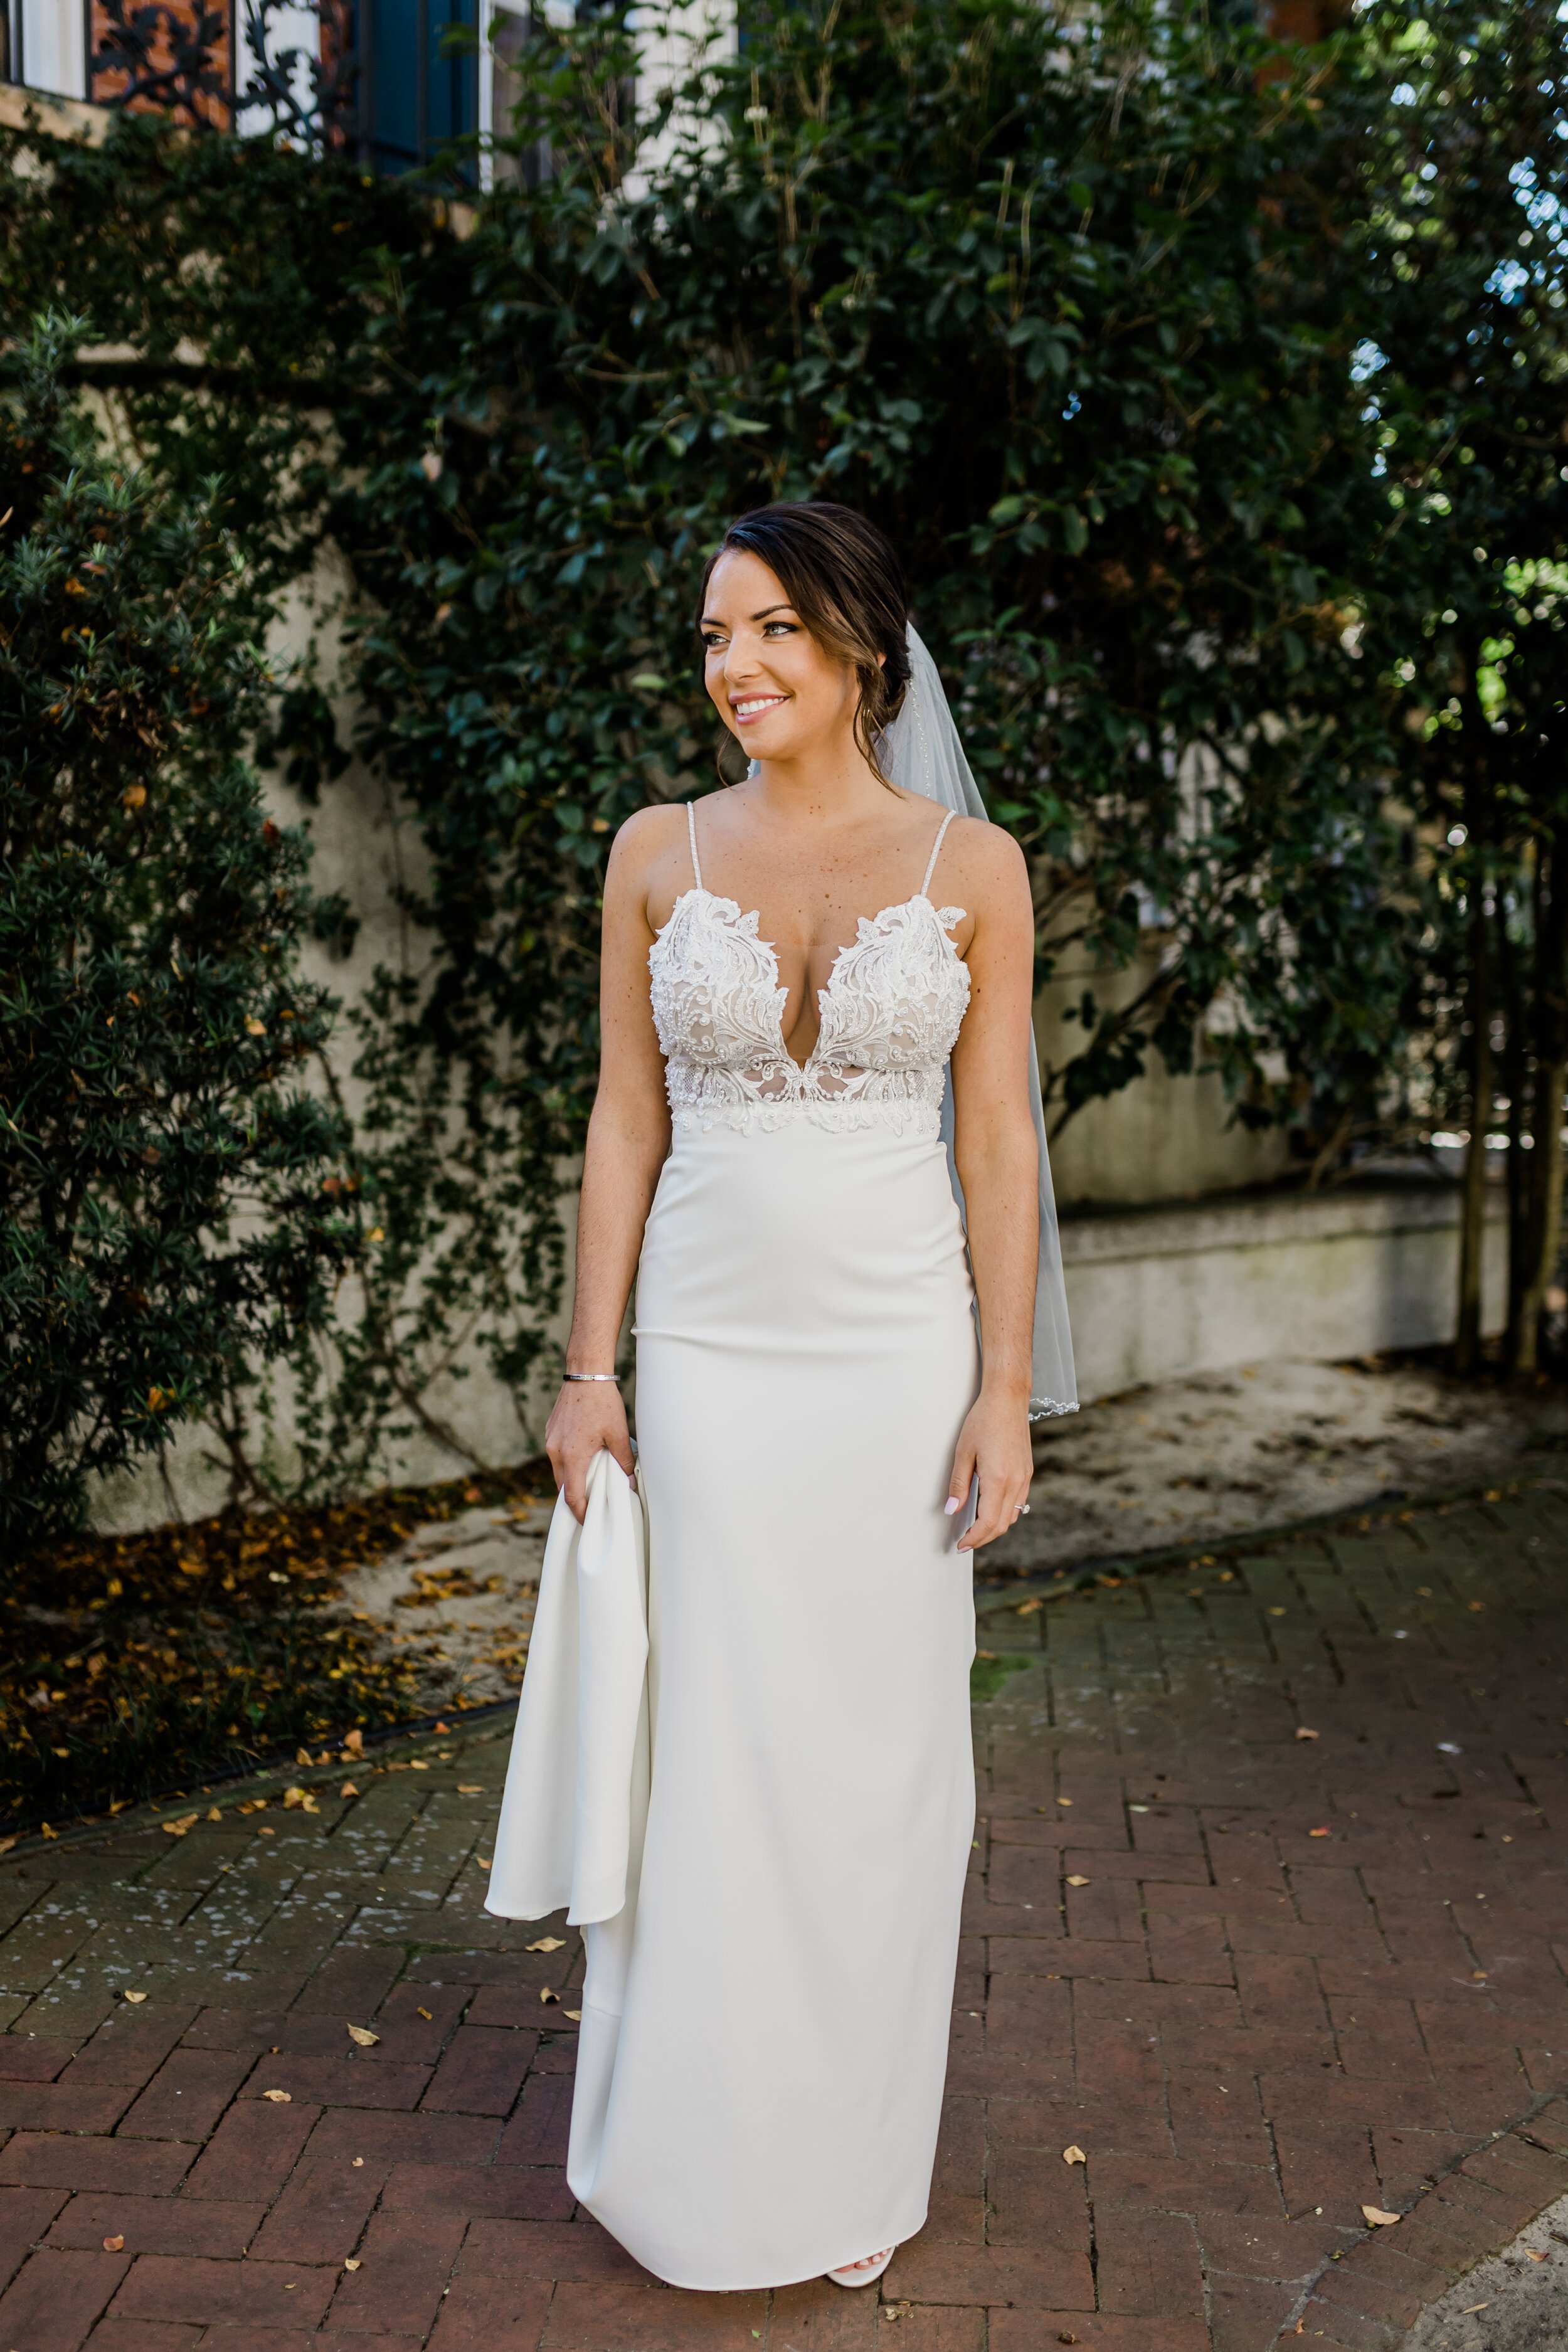 ivory-and-beau-bride-rosemary-wedding-dress-made-with-love-bridal-bridal-gown-wedding-gown-real-bride-wedding-blog-bridal-blog-bridal-shop-savannah-georgia-bridal-boutique-Portrait-2.jpg